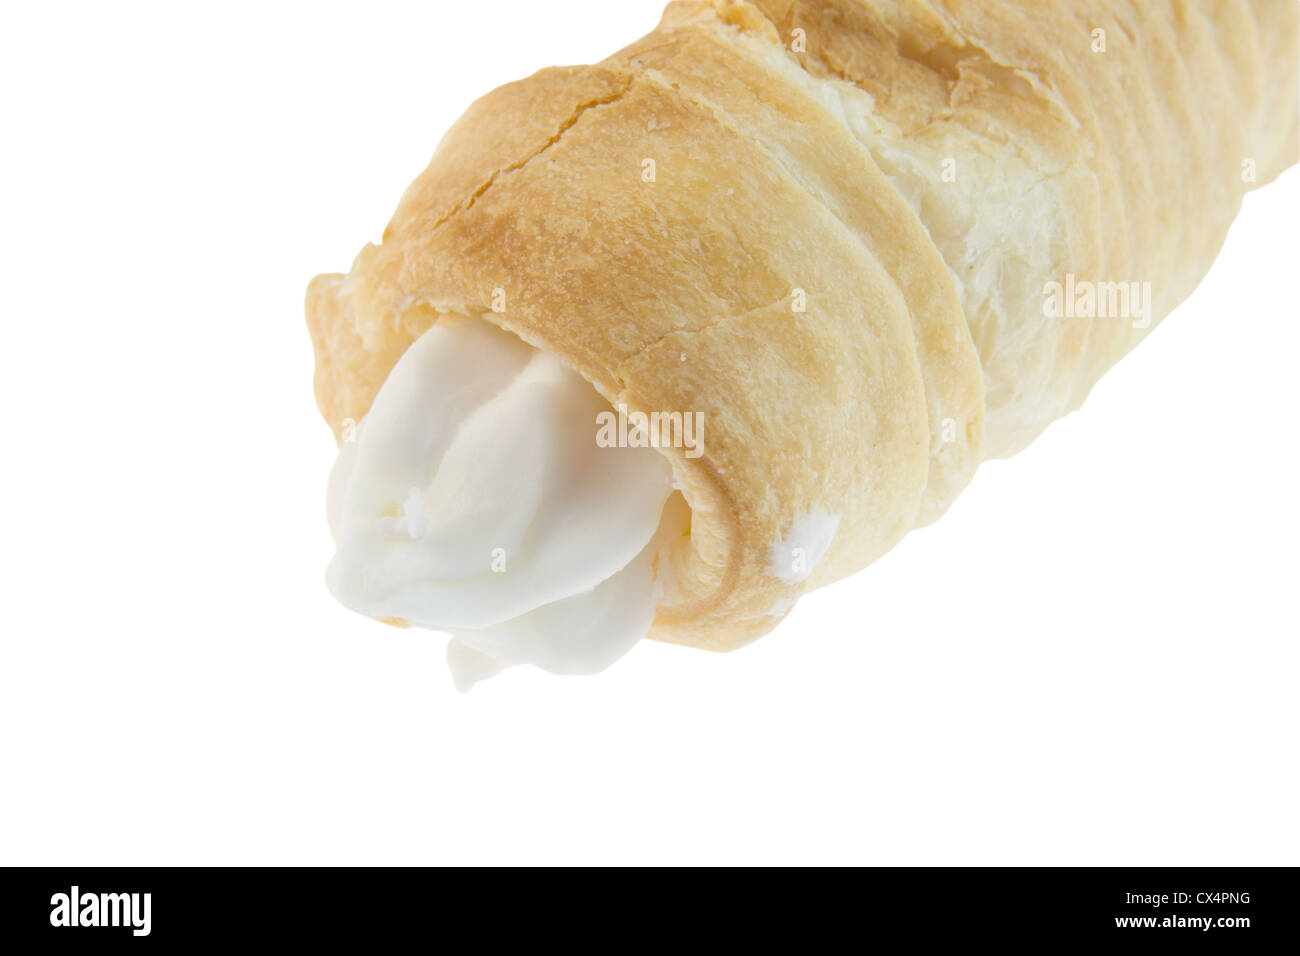 closeup of a flaky, baked pastry with white cream filling isolated on white Stock Photo